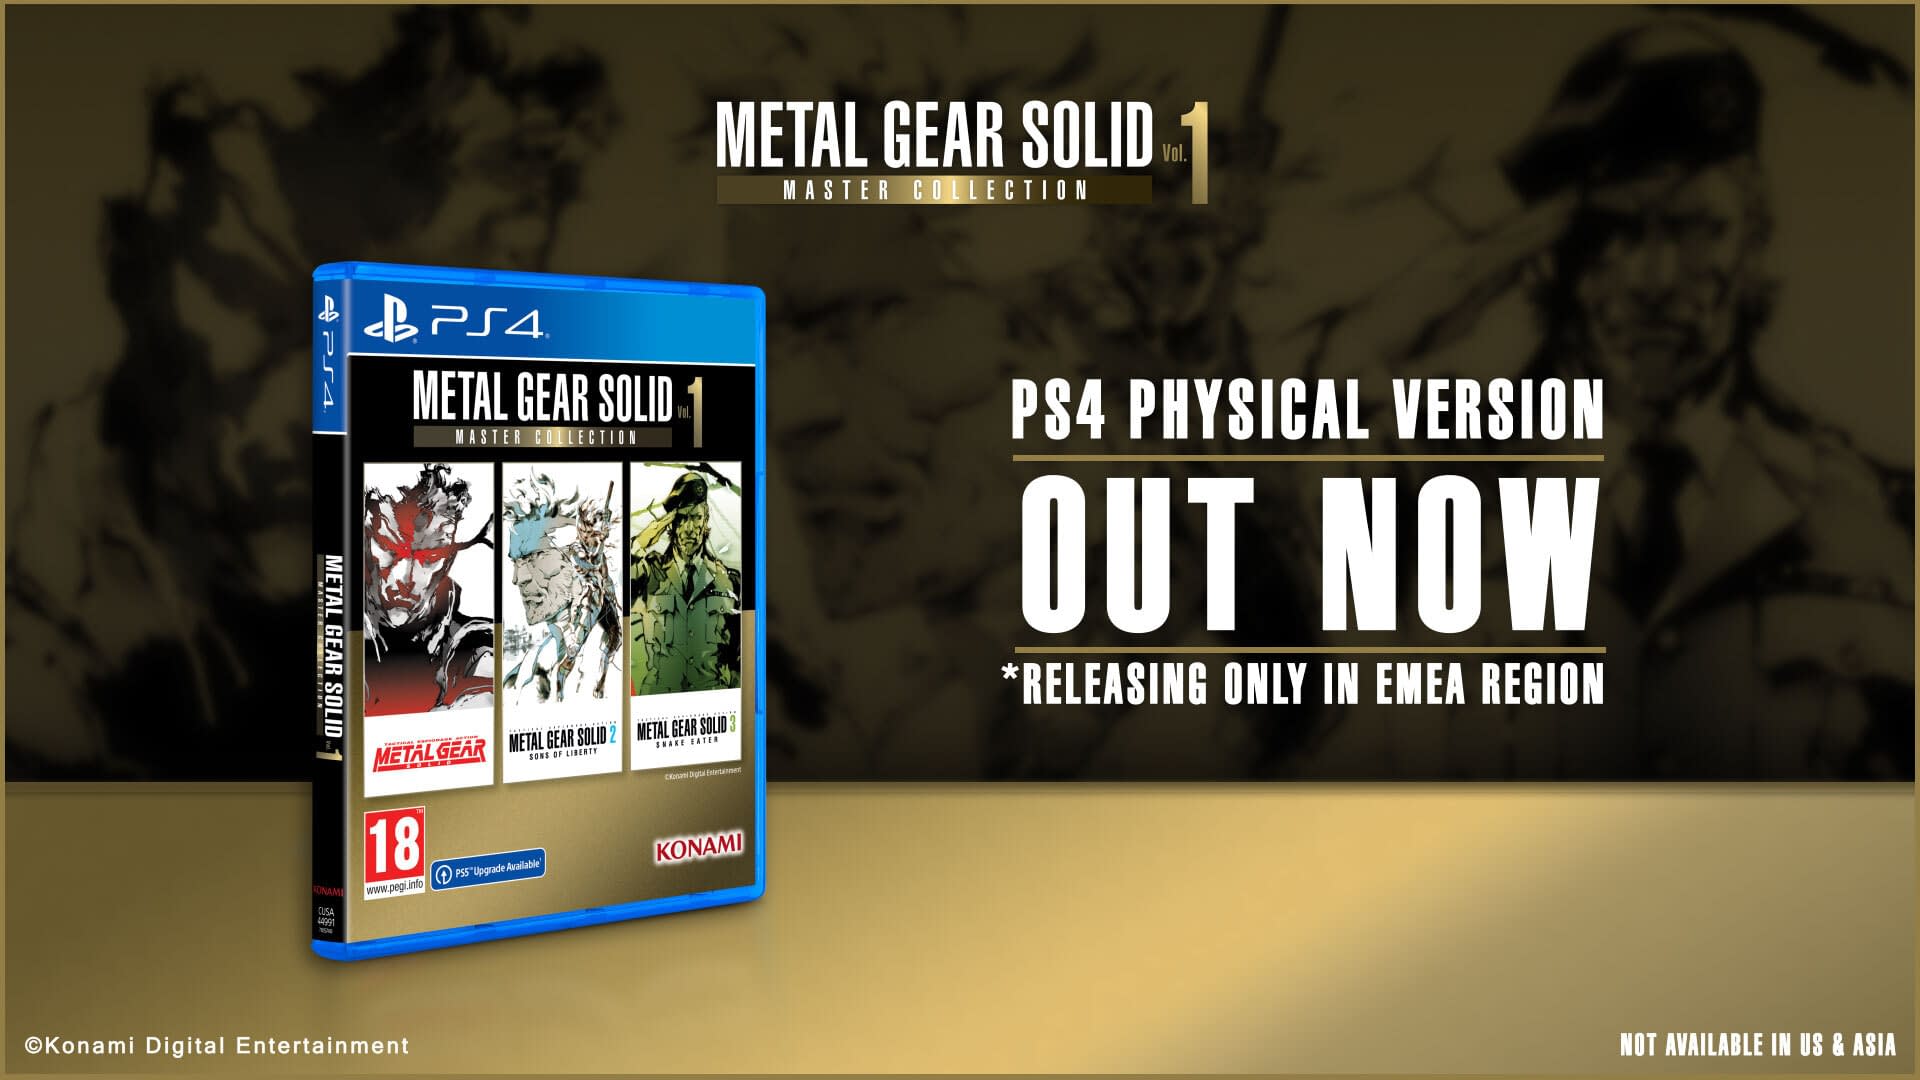 METAL GEAR SOLID: MASTER COLLECTION Vol.1 PS4 Physical Version Released!